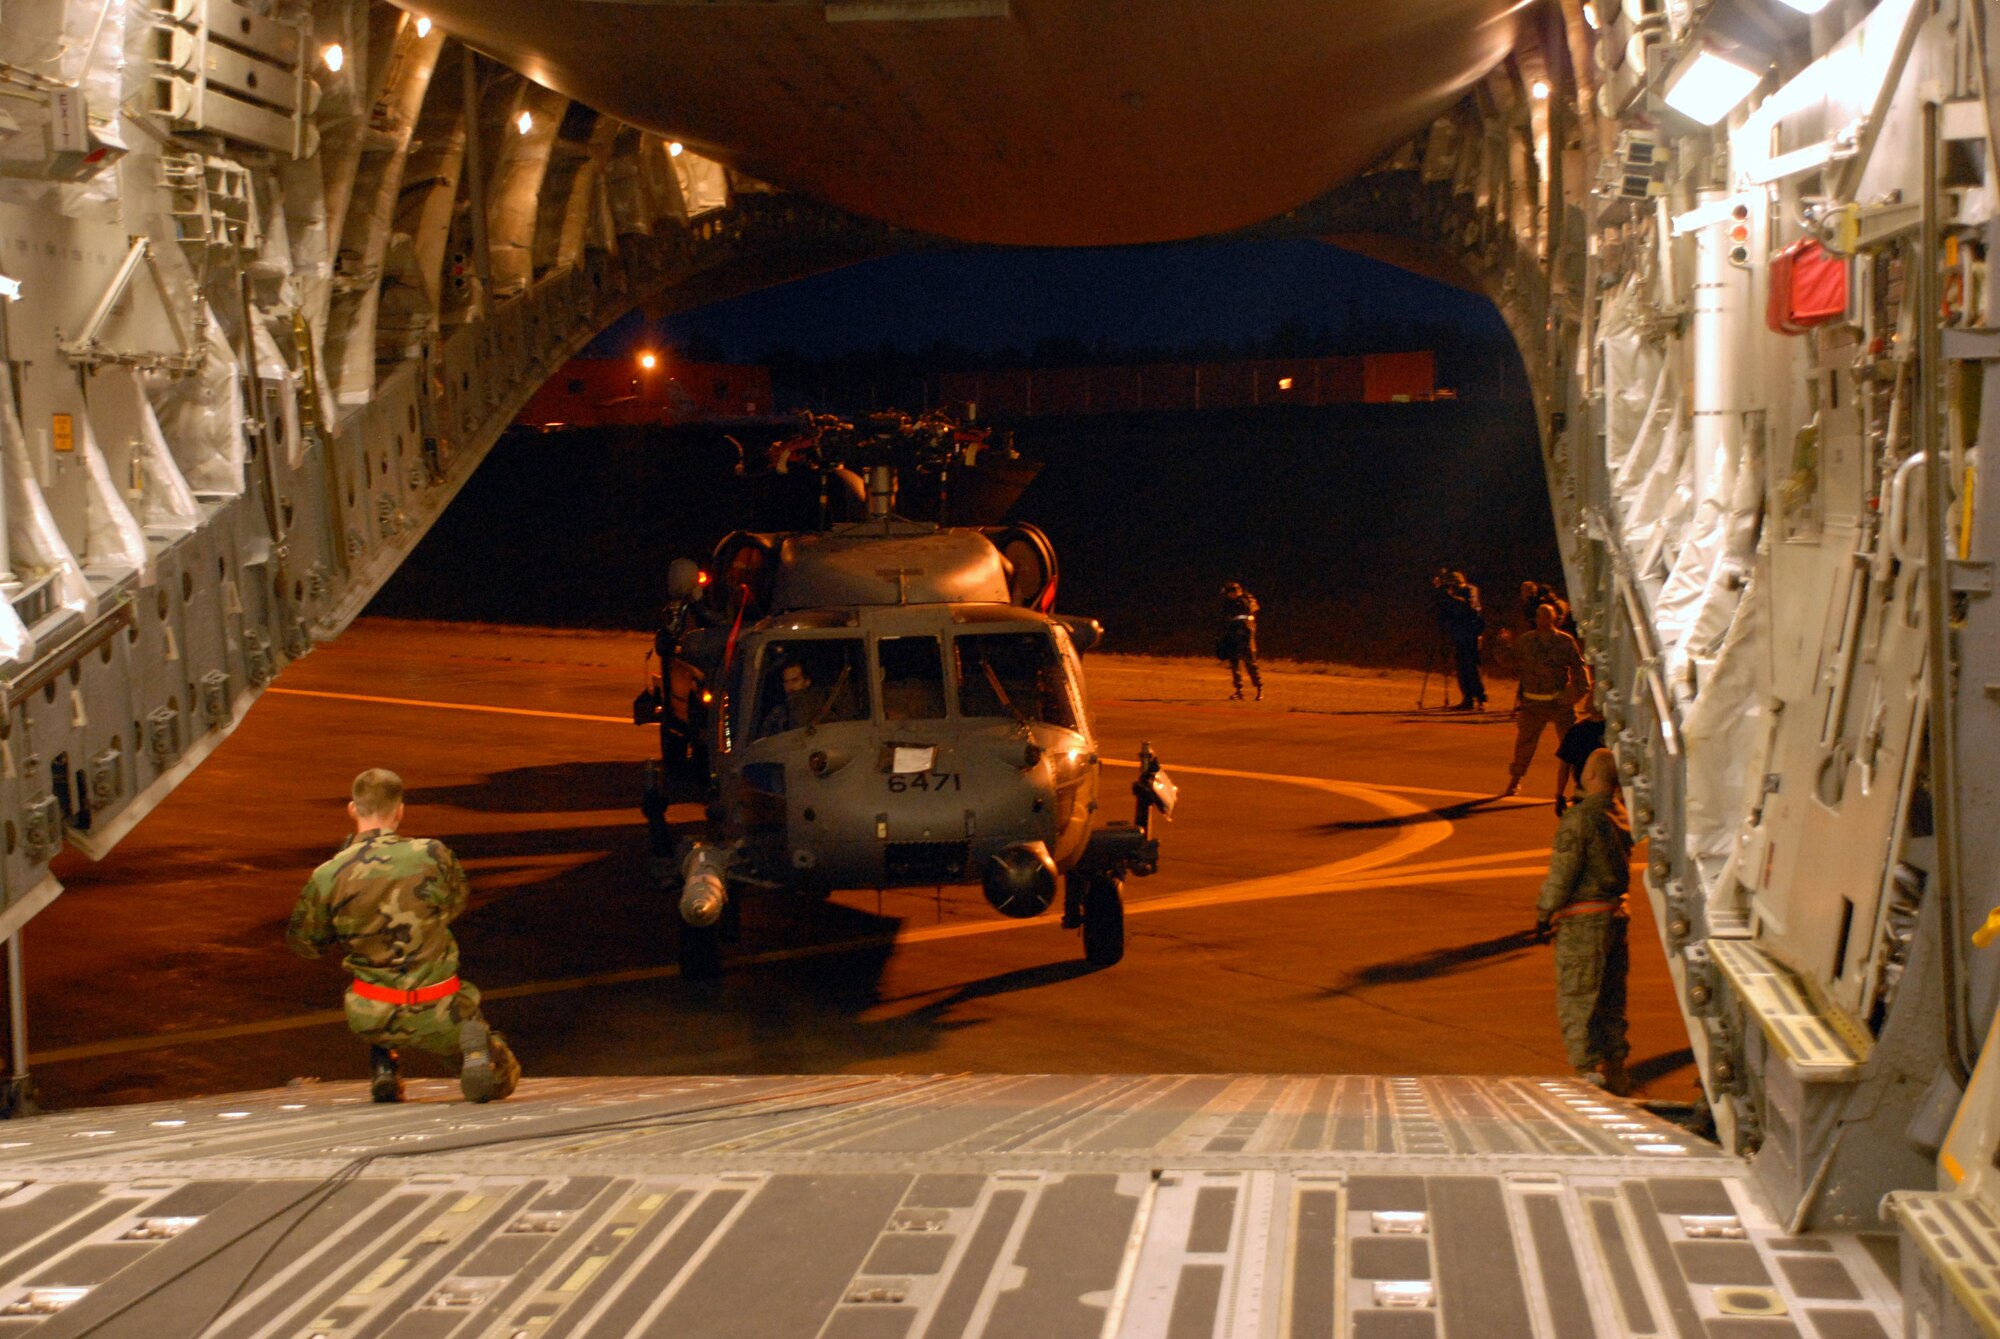 KULIS AIR NATIONAL GUARD BASE, Alaska -- In the early morning hours of Sept. 1, 2008, Alaska Air National Guardsmen from the 176th Logistics Readiness Squadron maneuver an HH-60 Pave Hawk helicopter onto the loading ramp of a C-17 strategic airlift jet. The helicopter is one of two the Alaska Air National Guard?s 176th Wing is deploying to the Gulf Coast region to support possible search-and-rescue operations expected in the wake of Hurricane Gustav. Approximately 30 wing members have deployed to the region as well. Alaska Air National Guard photo by 2nd Lt. John Callahan.